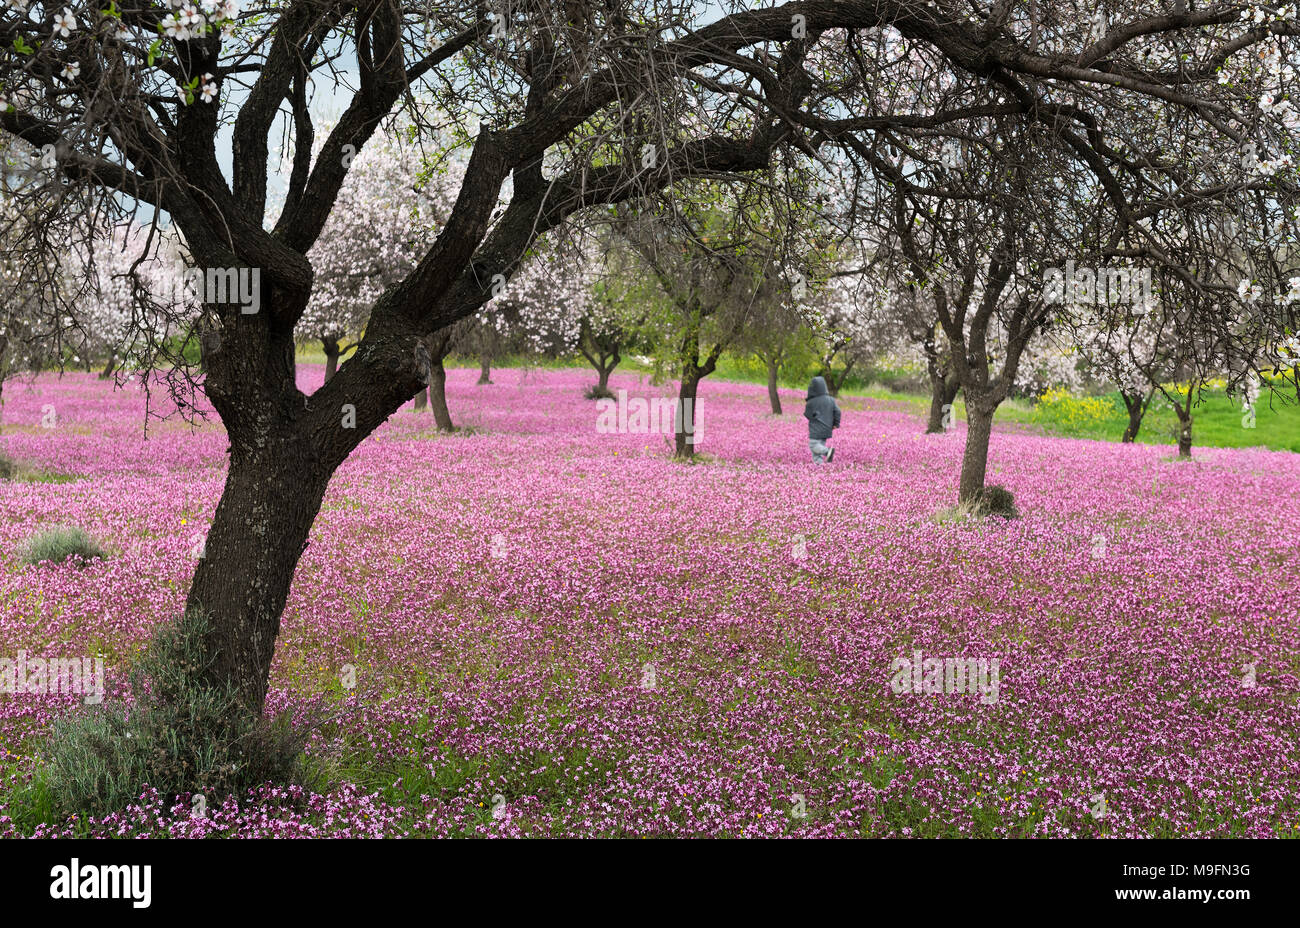 Beautiful field with almond trees full of white blossoms and purple veil of flowers in the ground, with an unrecognized young boy running with joy in Stock Photo